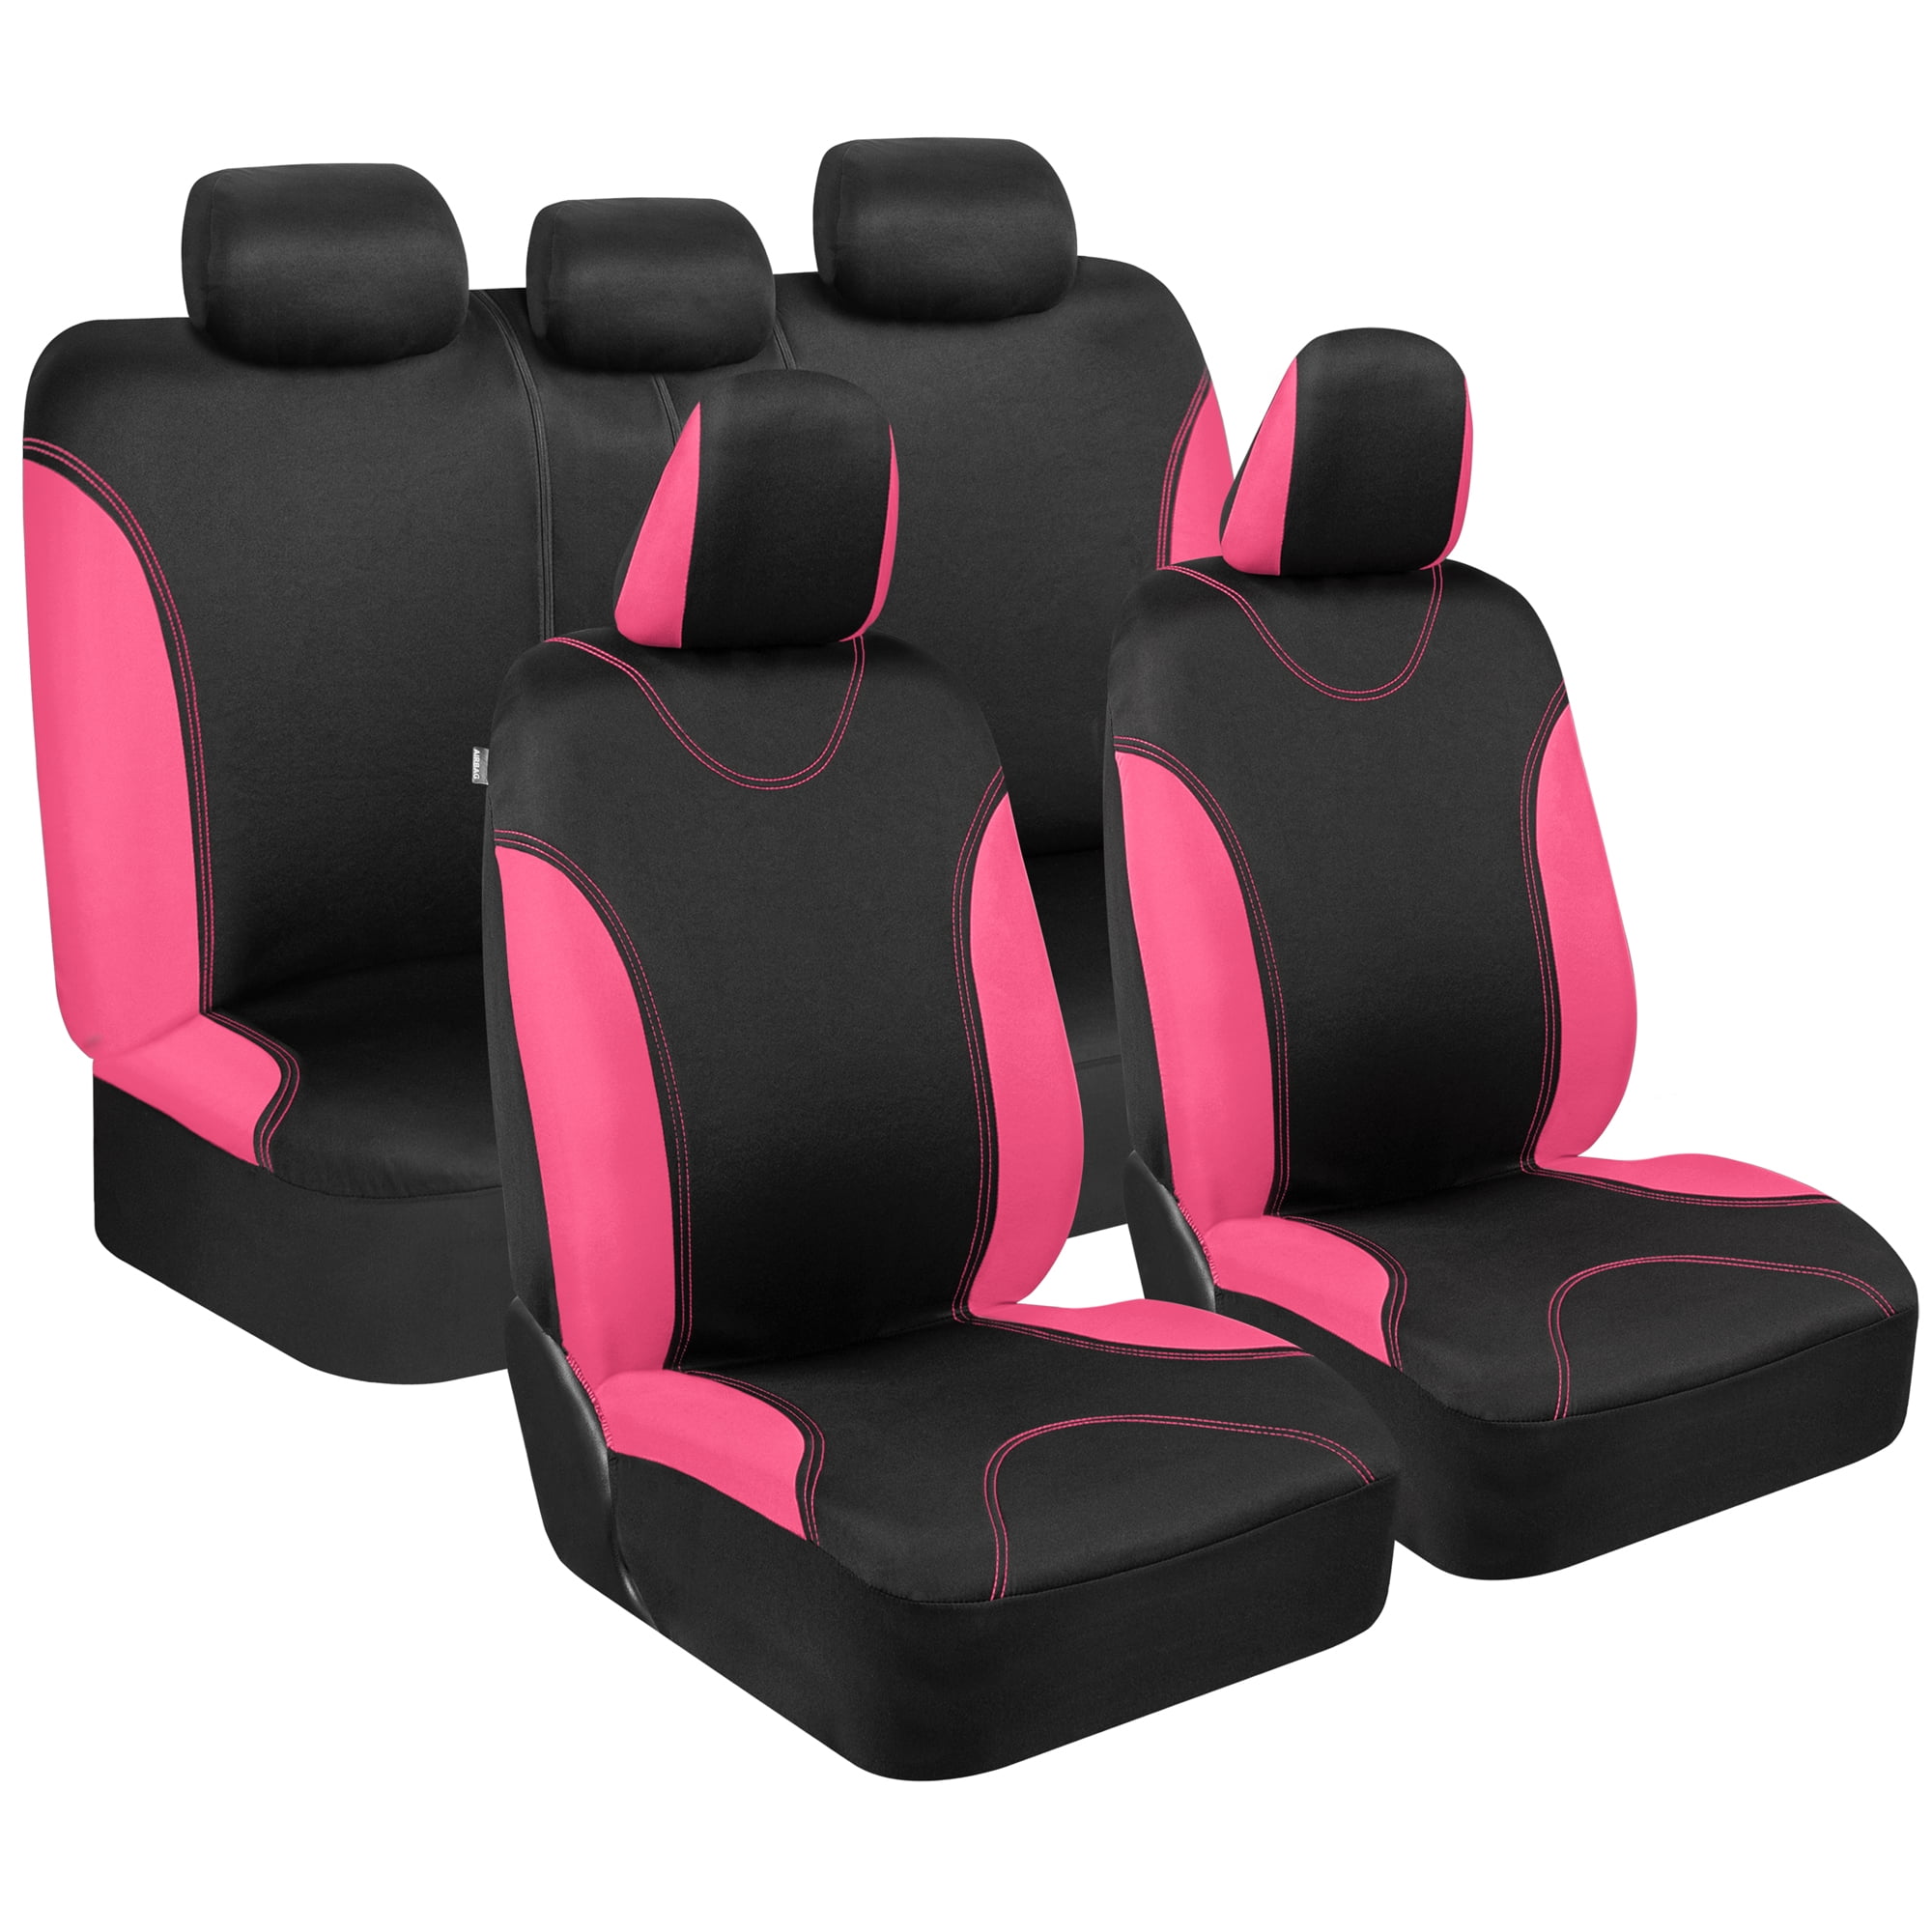 Pzuqiu Strawberry Seat Covers for Cars Pink Car Accessories for